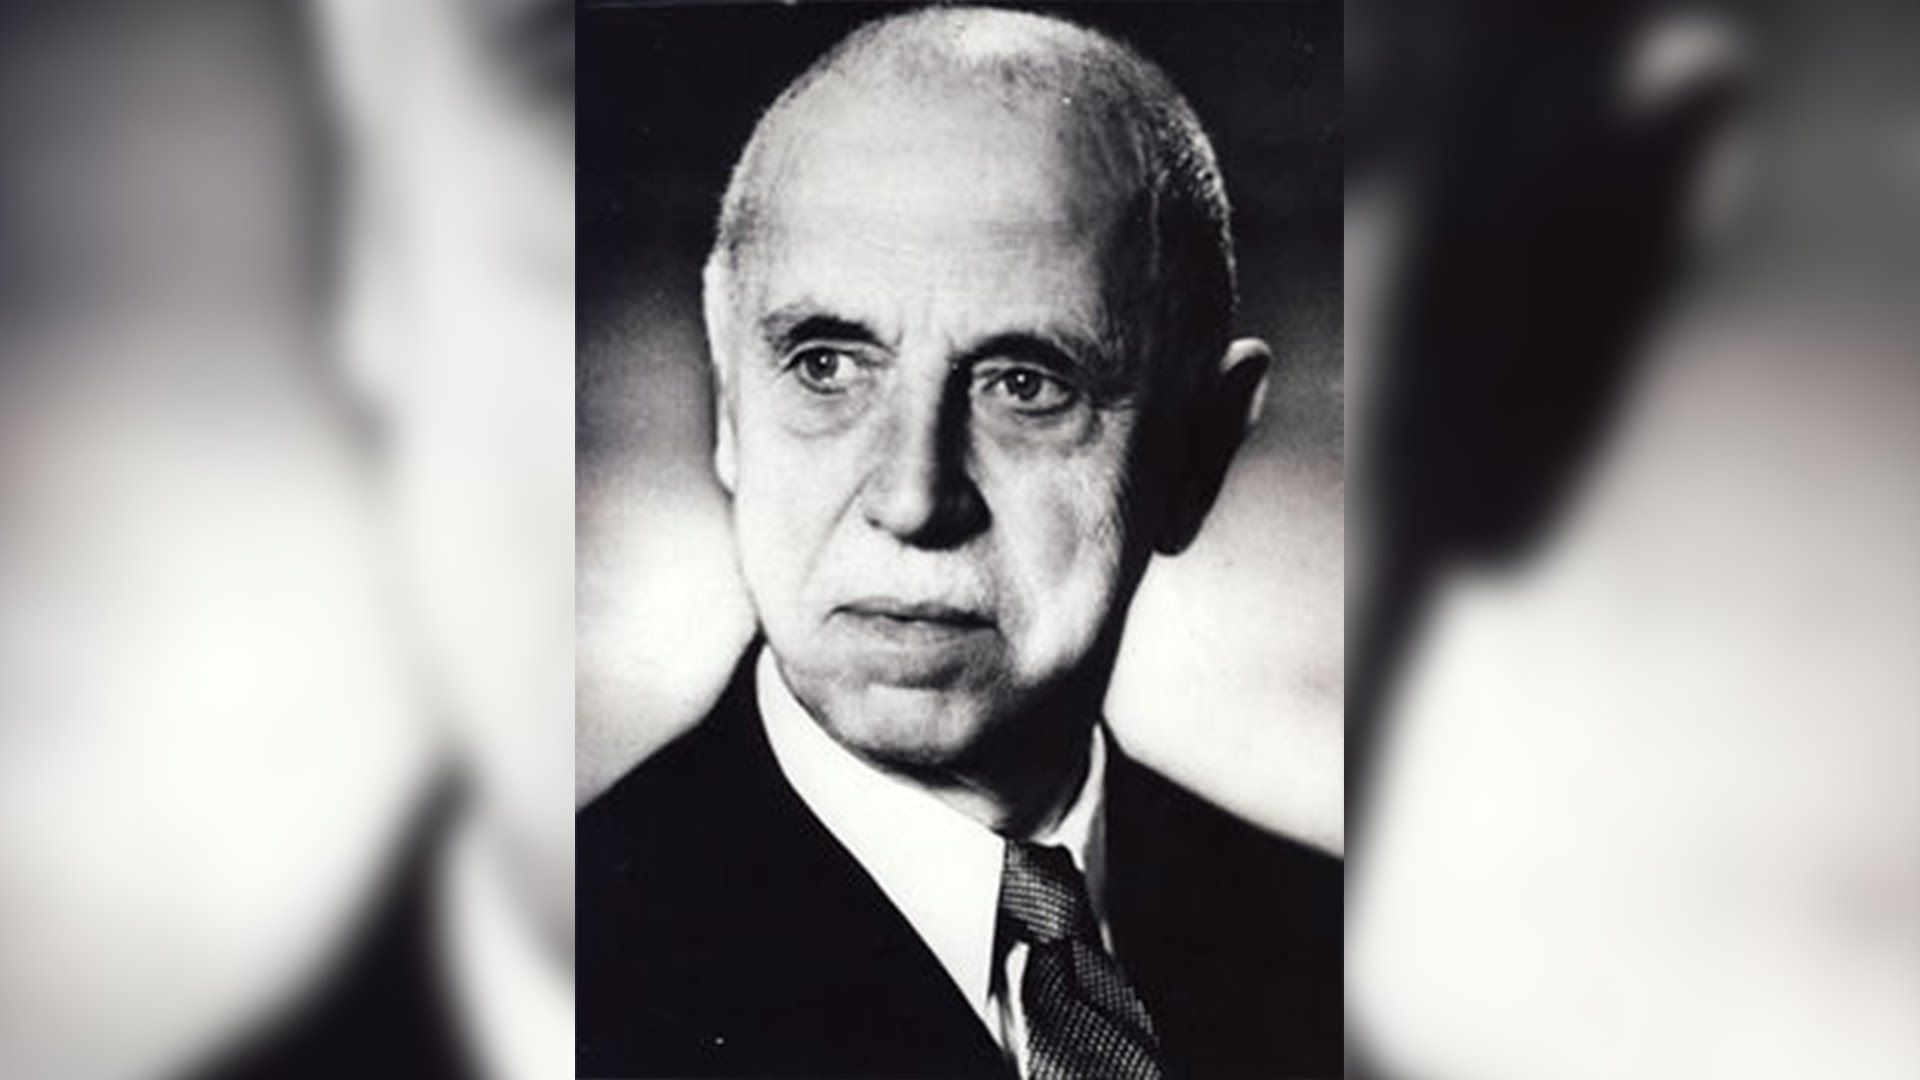  Parhon was the founder of the Romanian school of endocrinology.In 1909, he co-authored with Moise Goldstein the world's first medical treatise on endocrinology  , Secrețiile Interne (